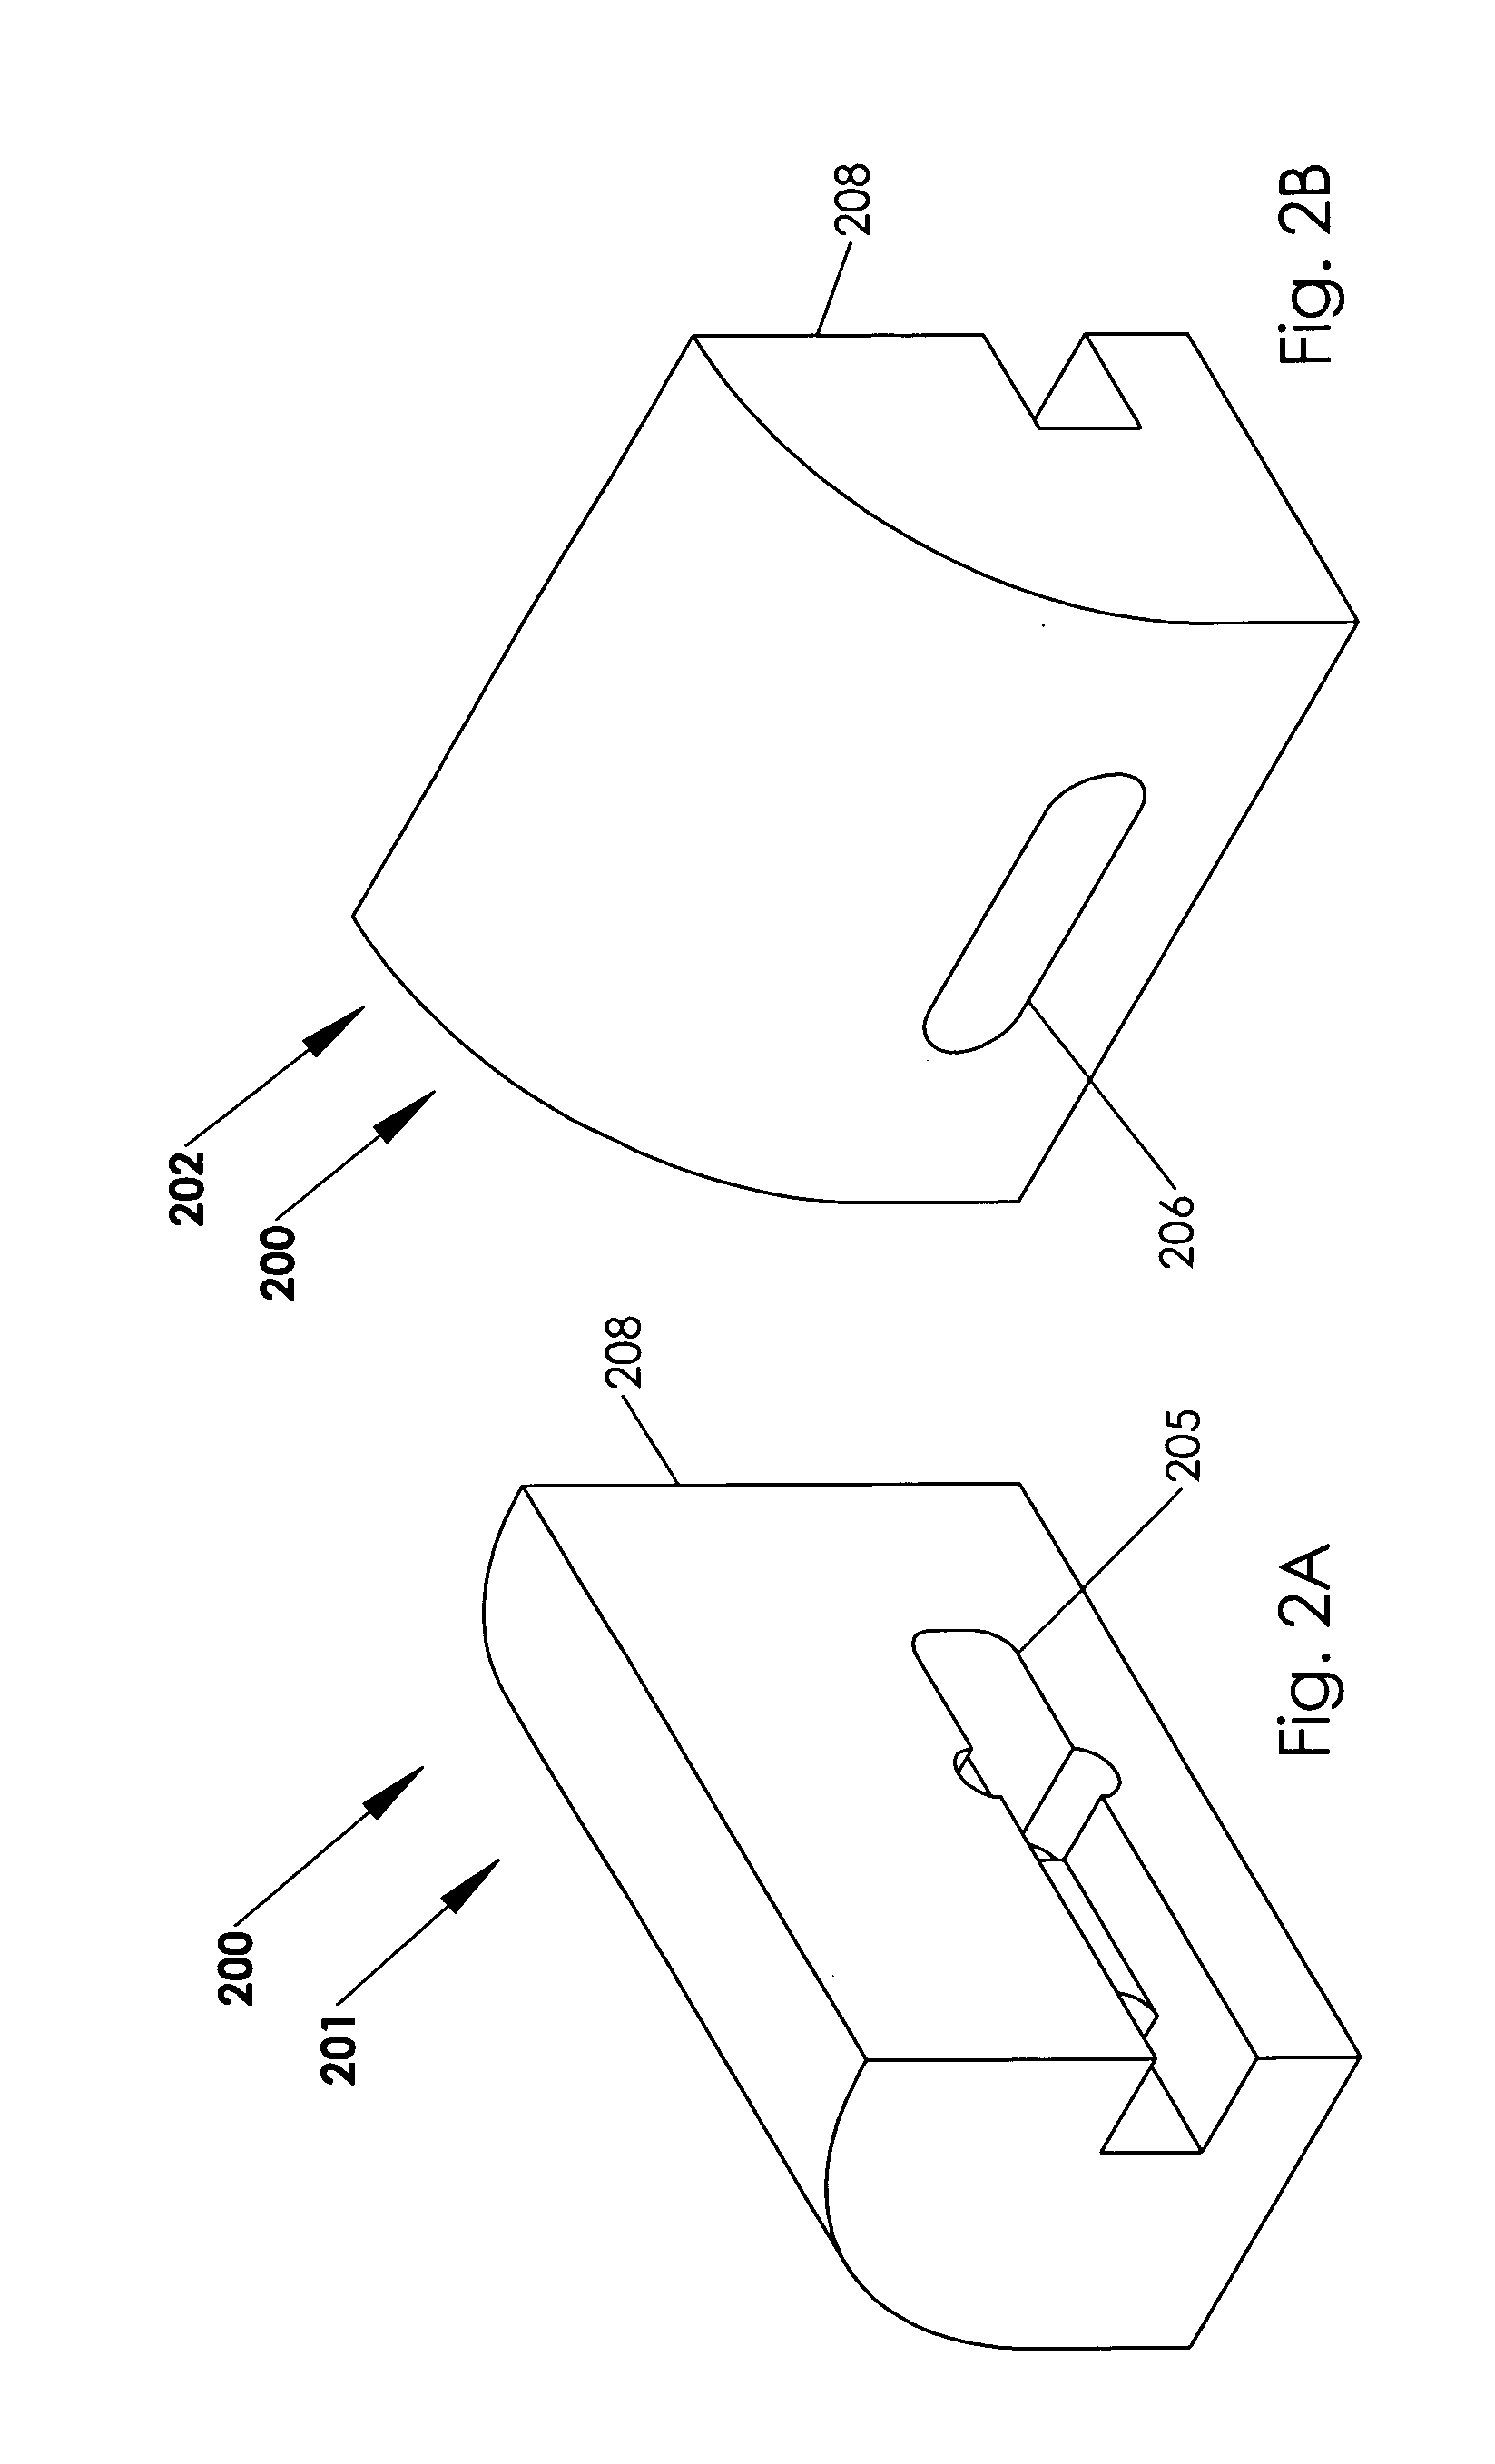 Method and system for storing and inserting an implant